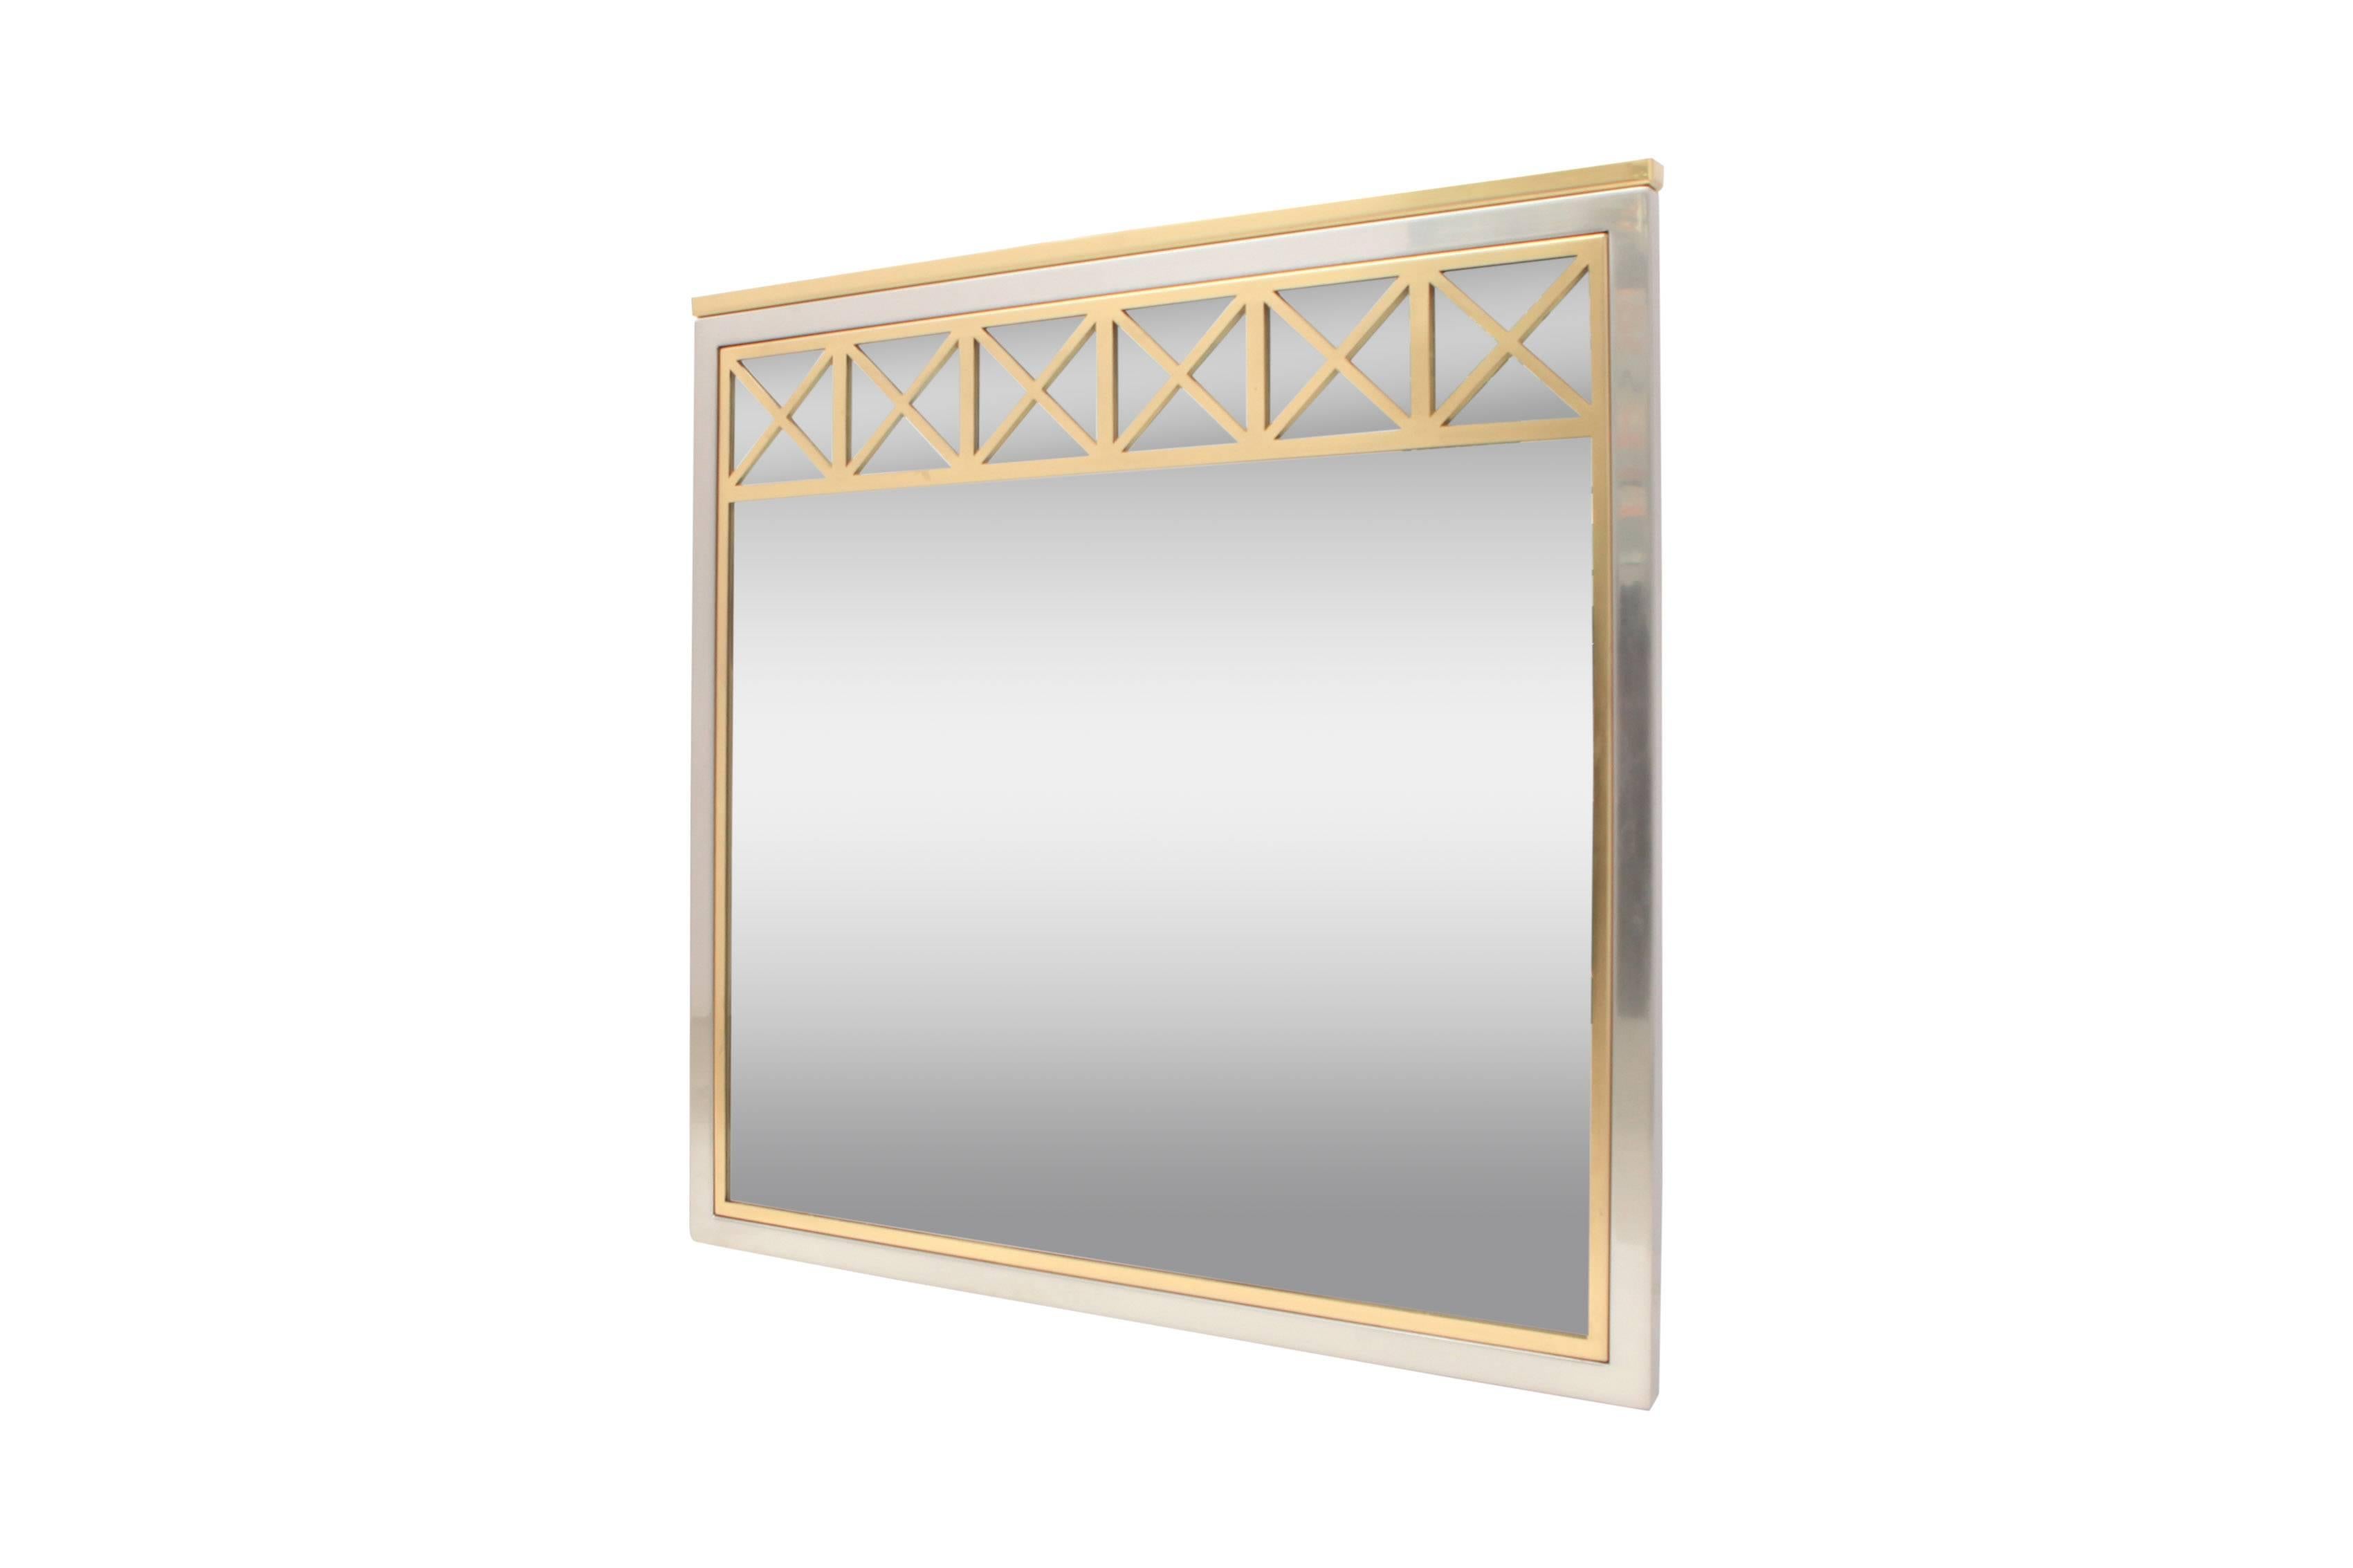 Mid-Century Modern brass and chrome mirror.
Attributed to Maison Jansen, France, 1970.

Excellent high-end design in mint condition.

Measures: W 88 x H 91 x D 4 cm.